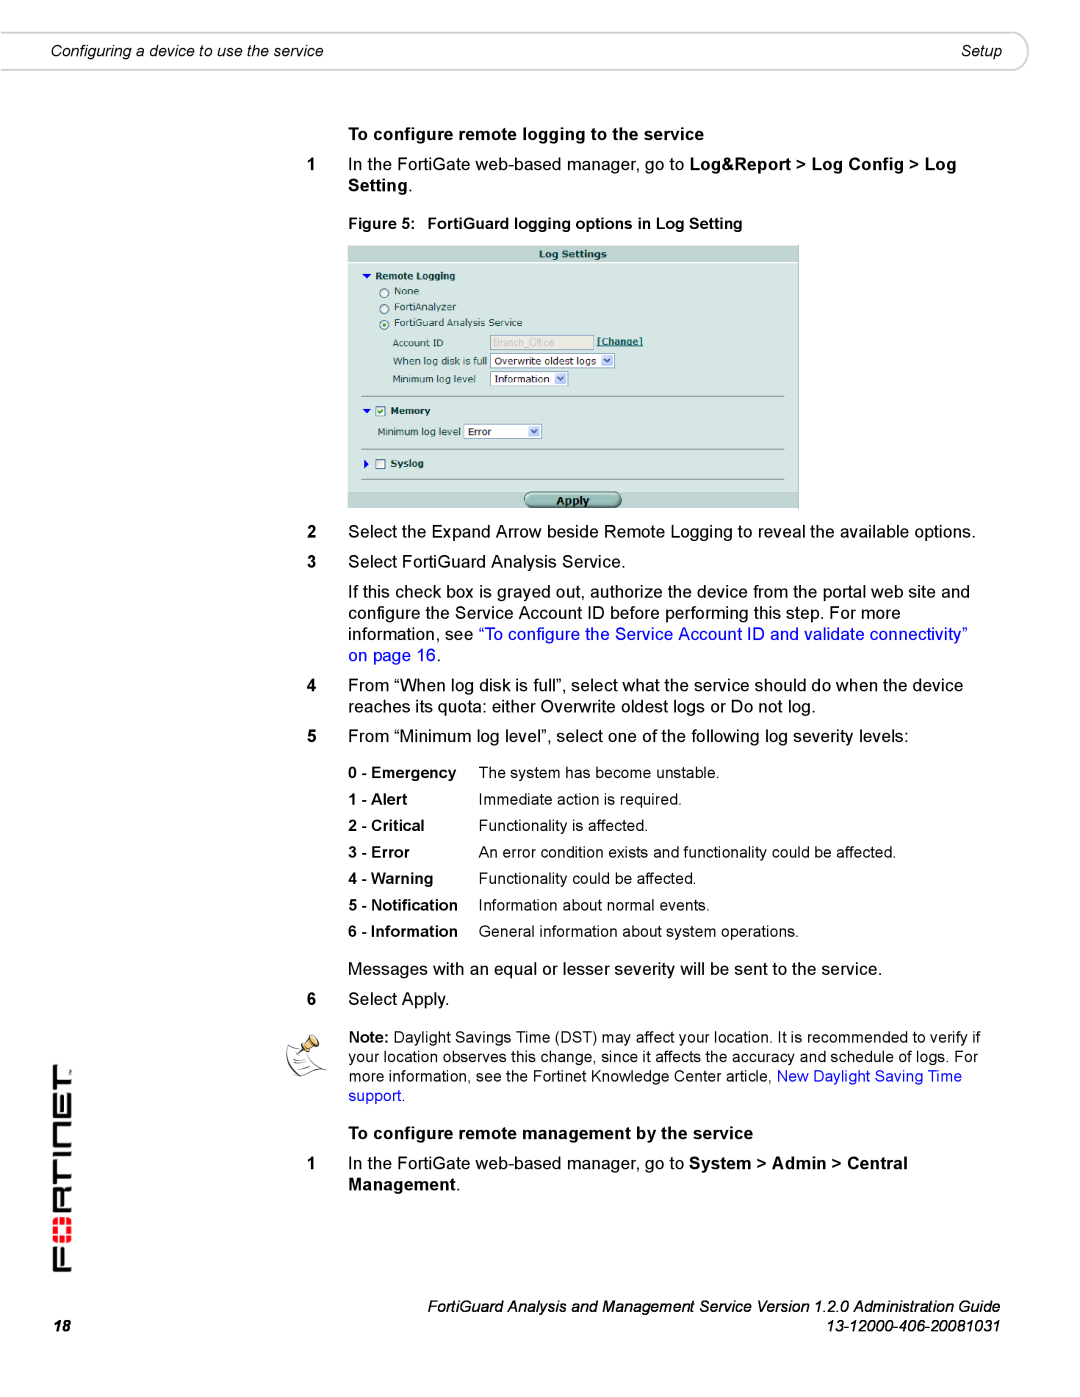 Fortinet 1.2.0 manual To configure remote logging to the service, To configure remote management by the service 